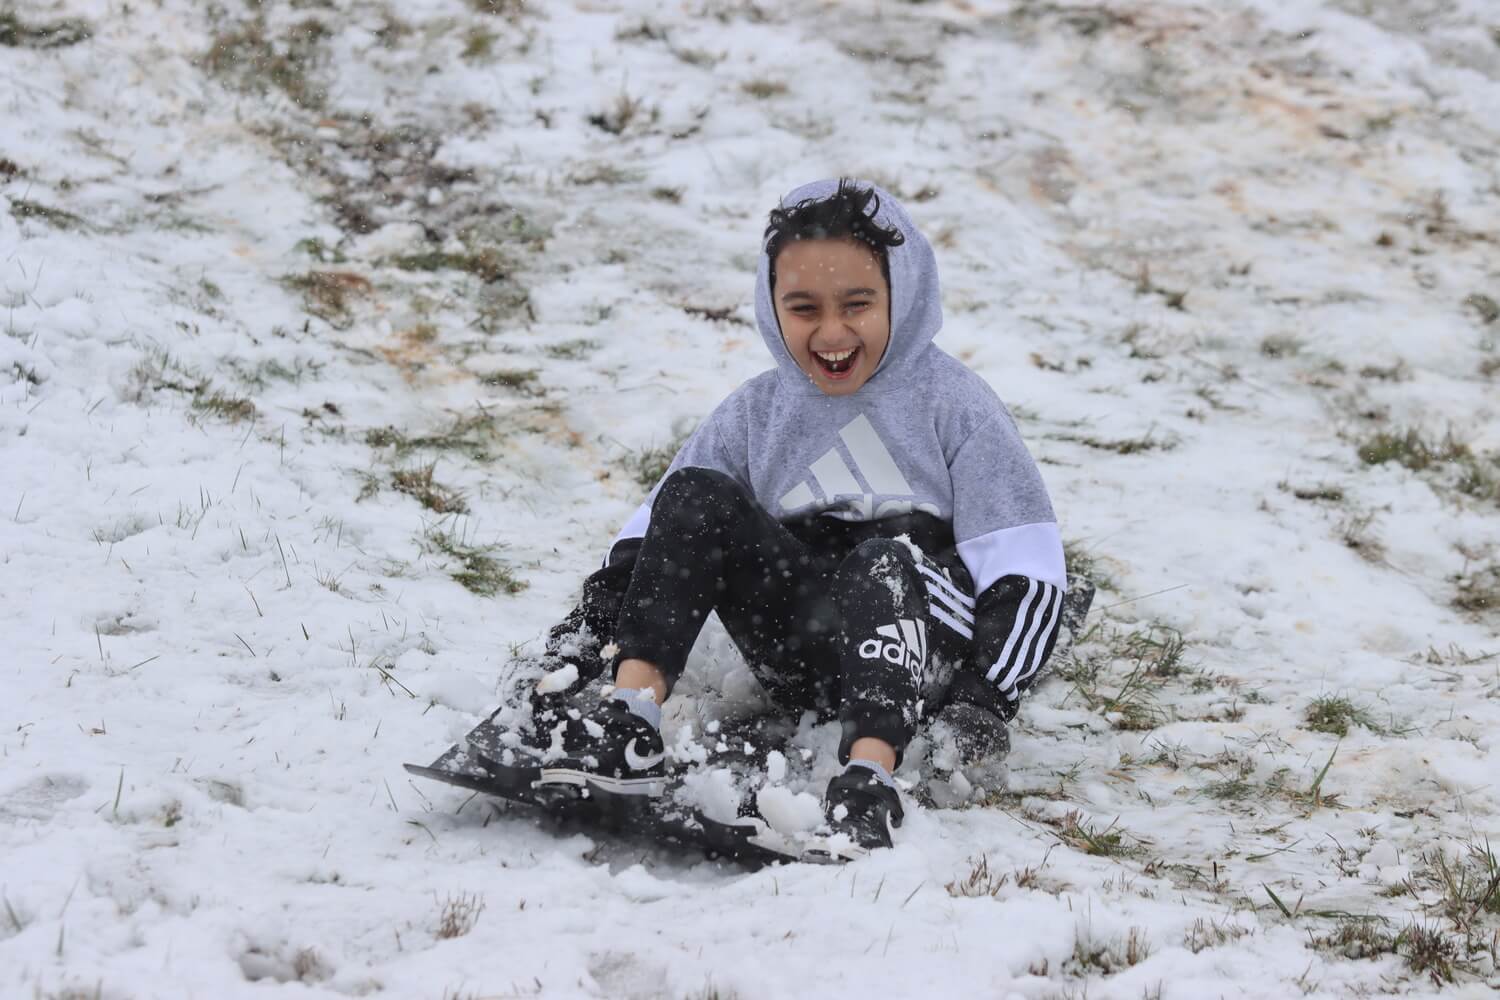 A student screaming with laughter as they sled down the snowy hill at the school.